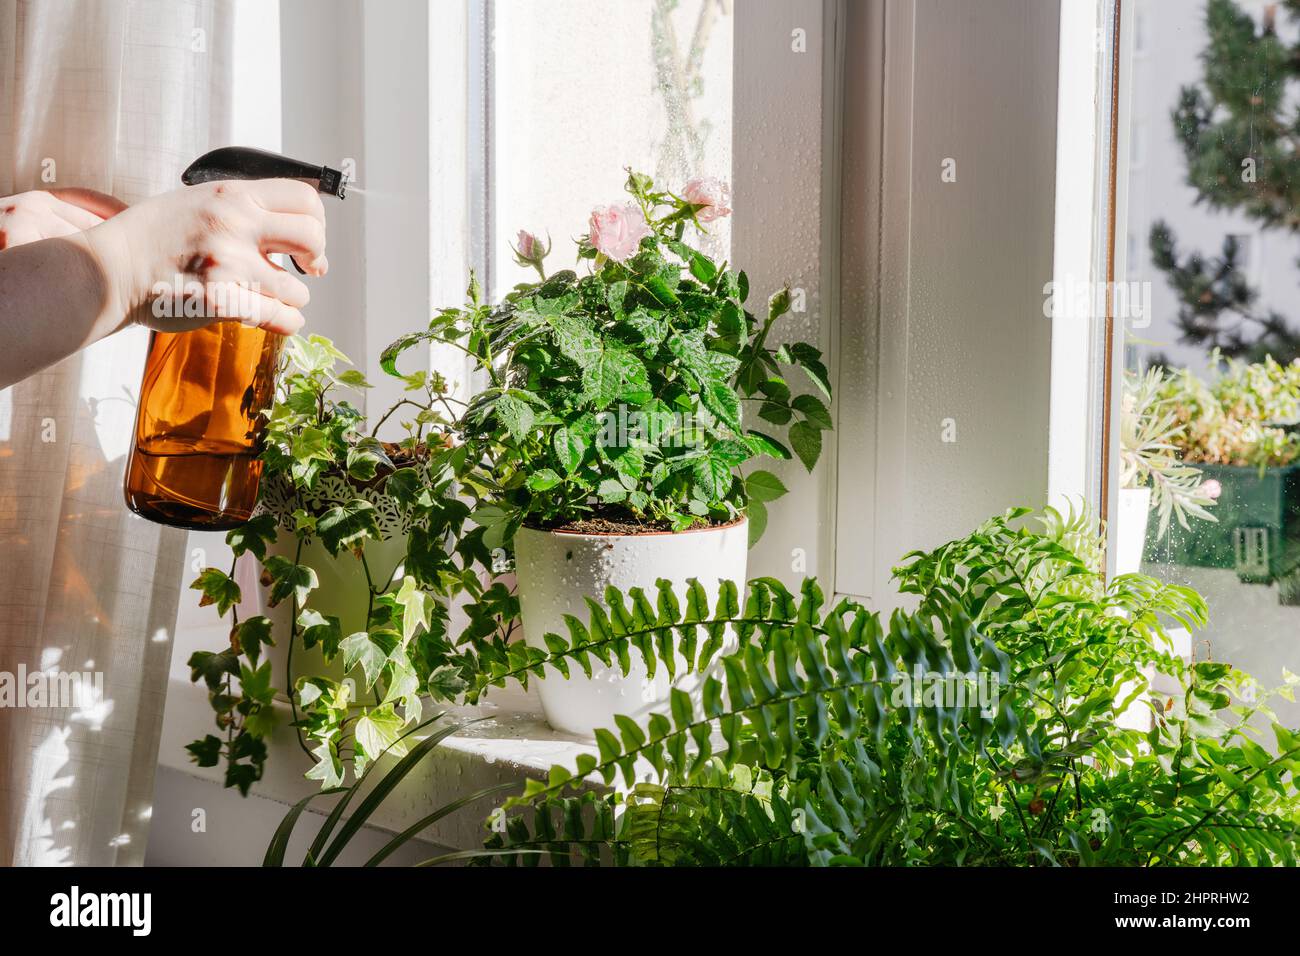 Woman taking care and spraying with water dry indoor green plants. Home gardening and urban jungle concept Stock Photo